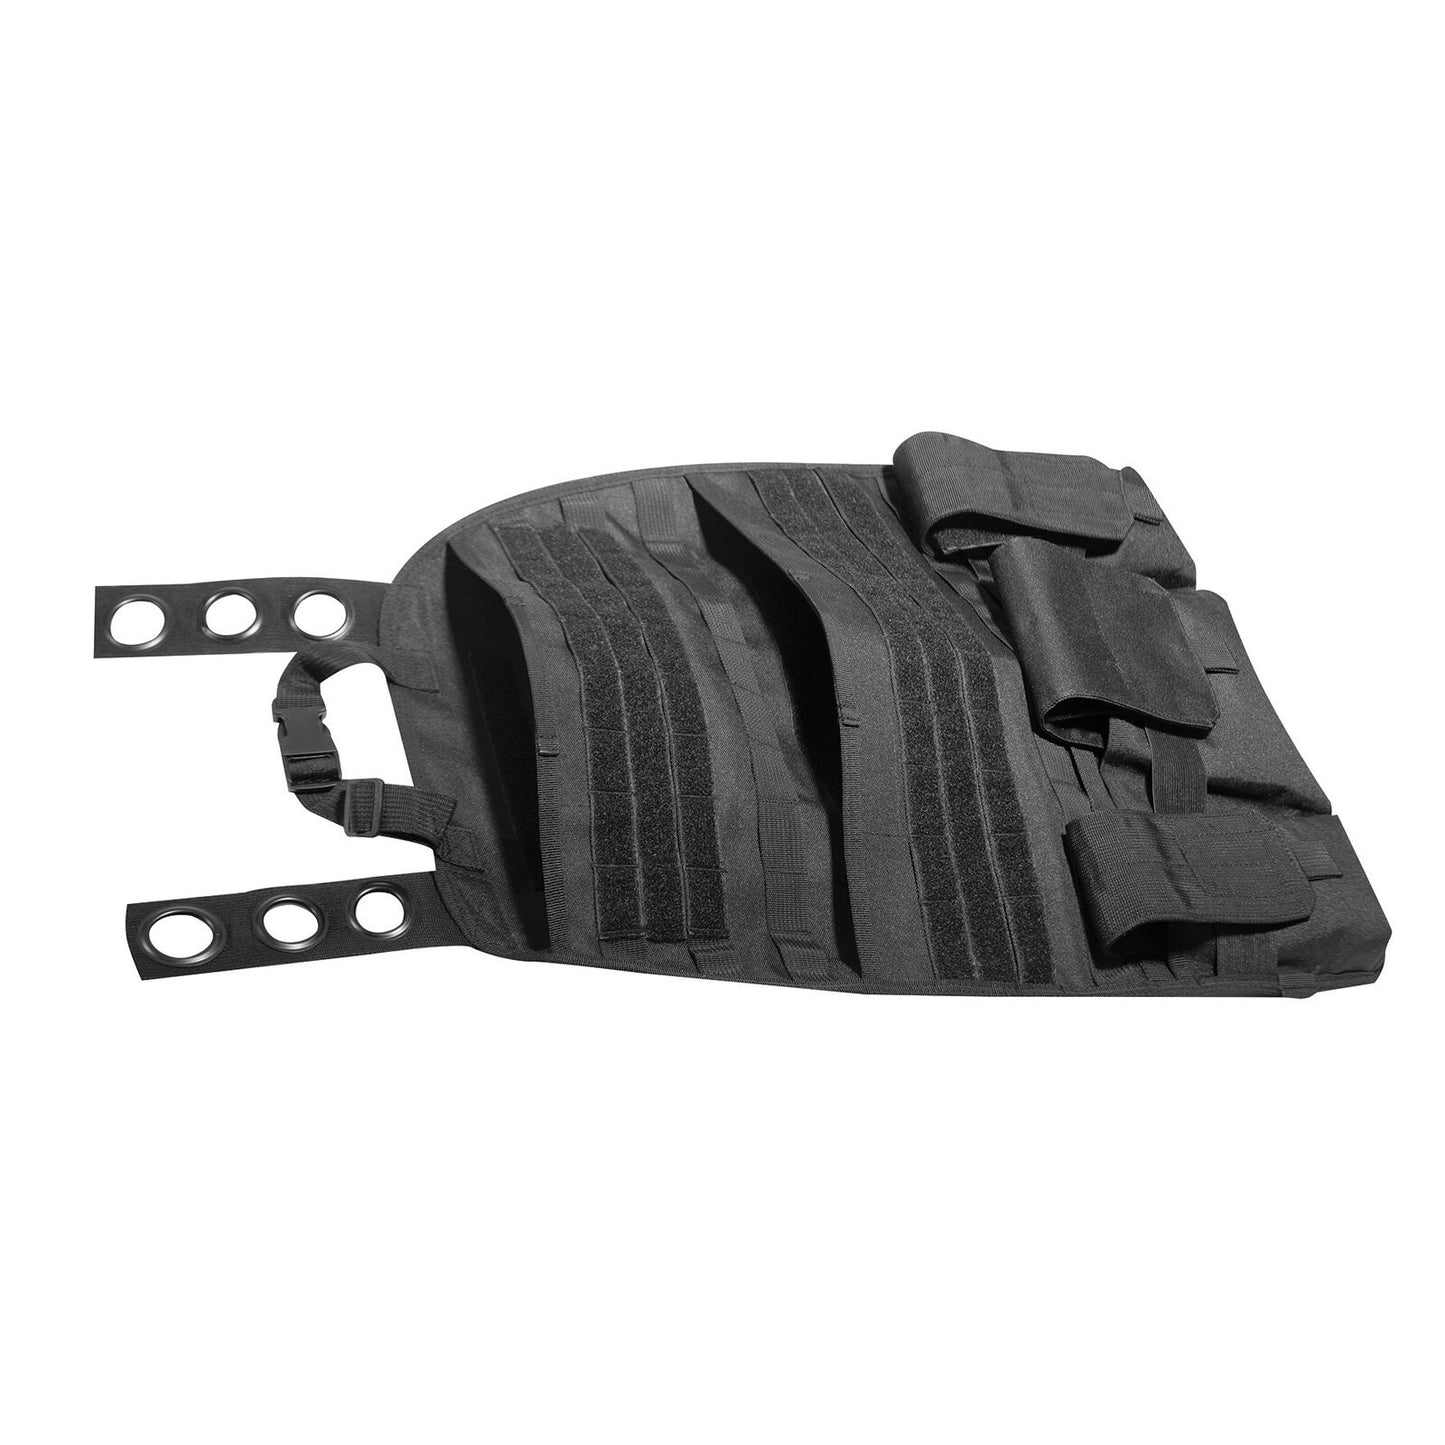 Rothco Tactical Car Seat Panel in Black - MOLLE Compatible Car Storage Gear